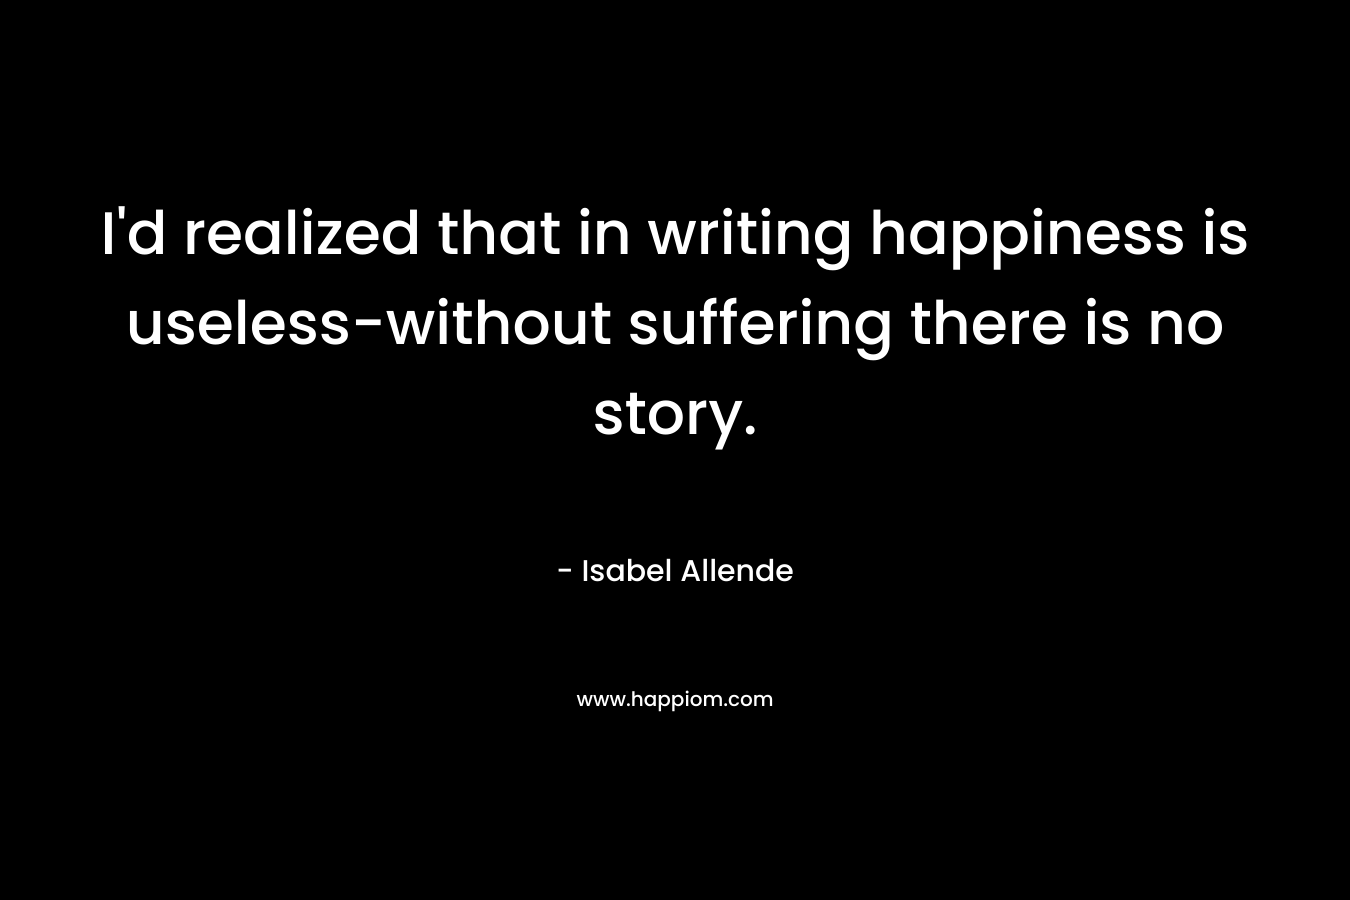 I'd realized that in writing happiness is useless-without suffering there is no story.